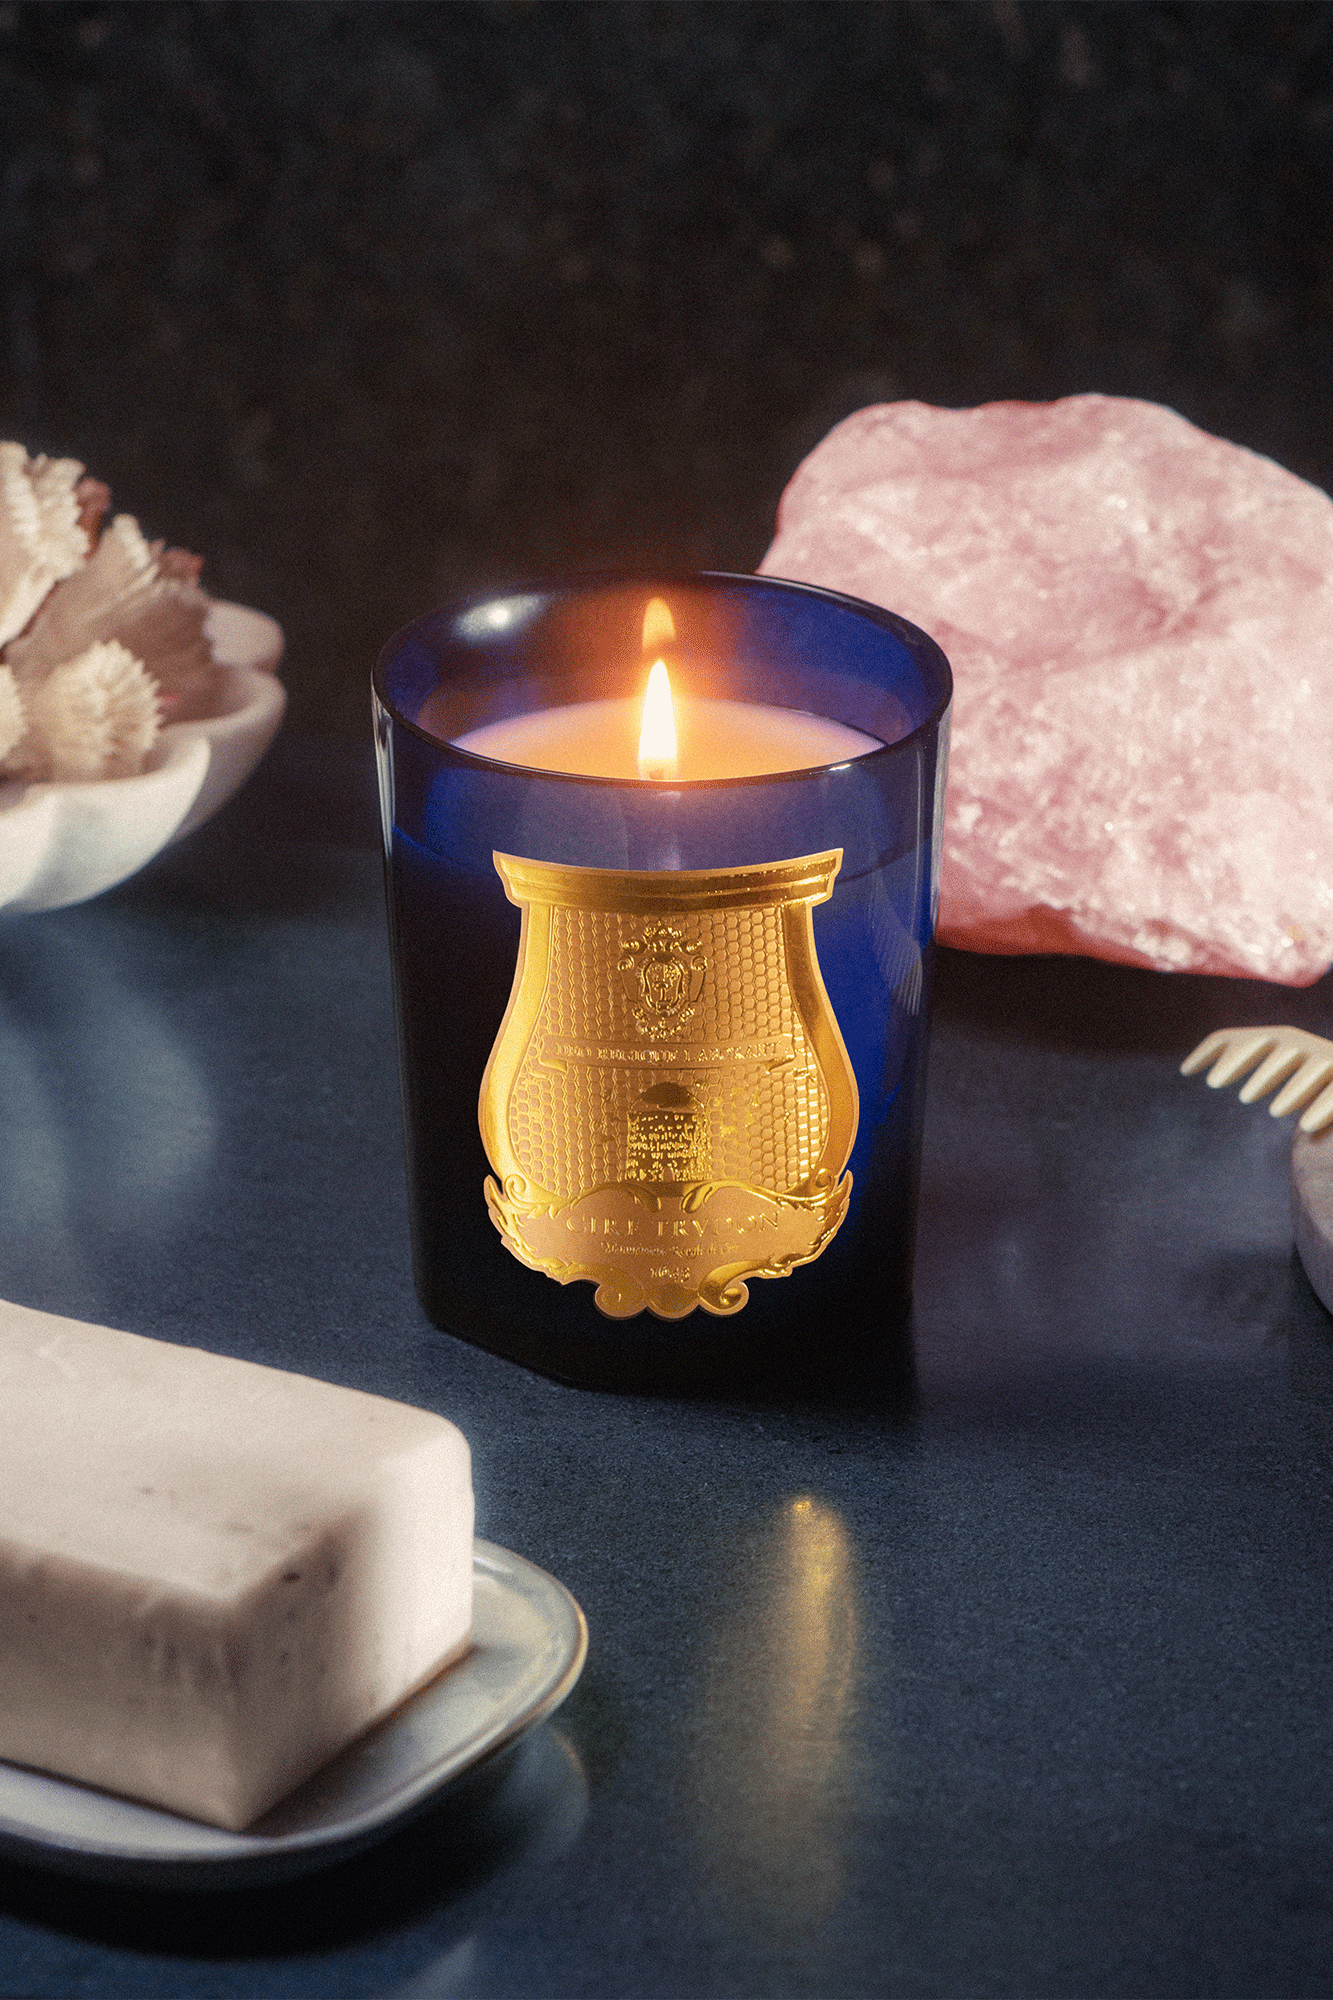 Ourika Classic Candle